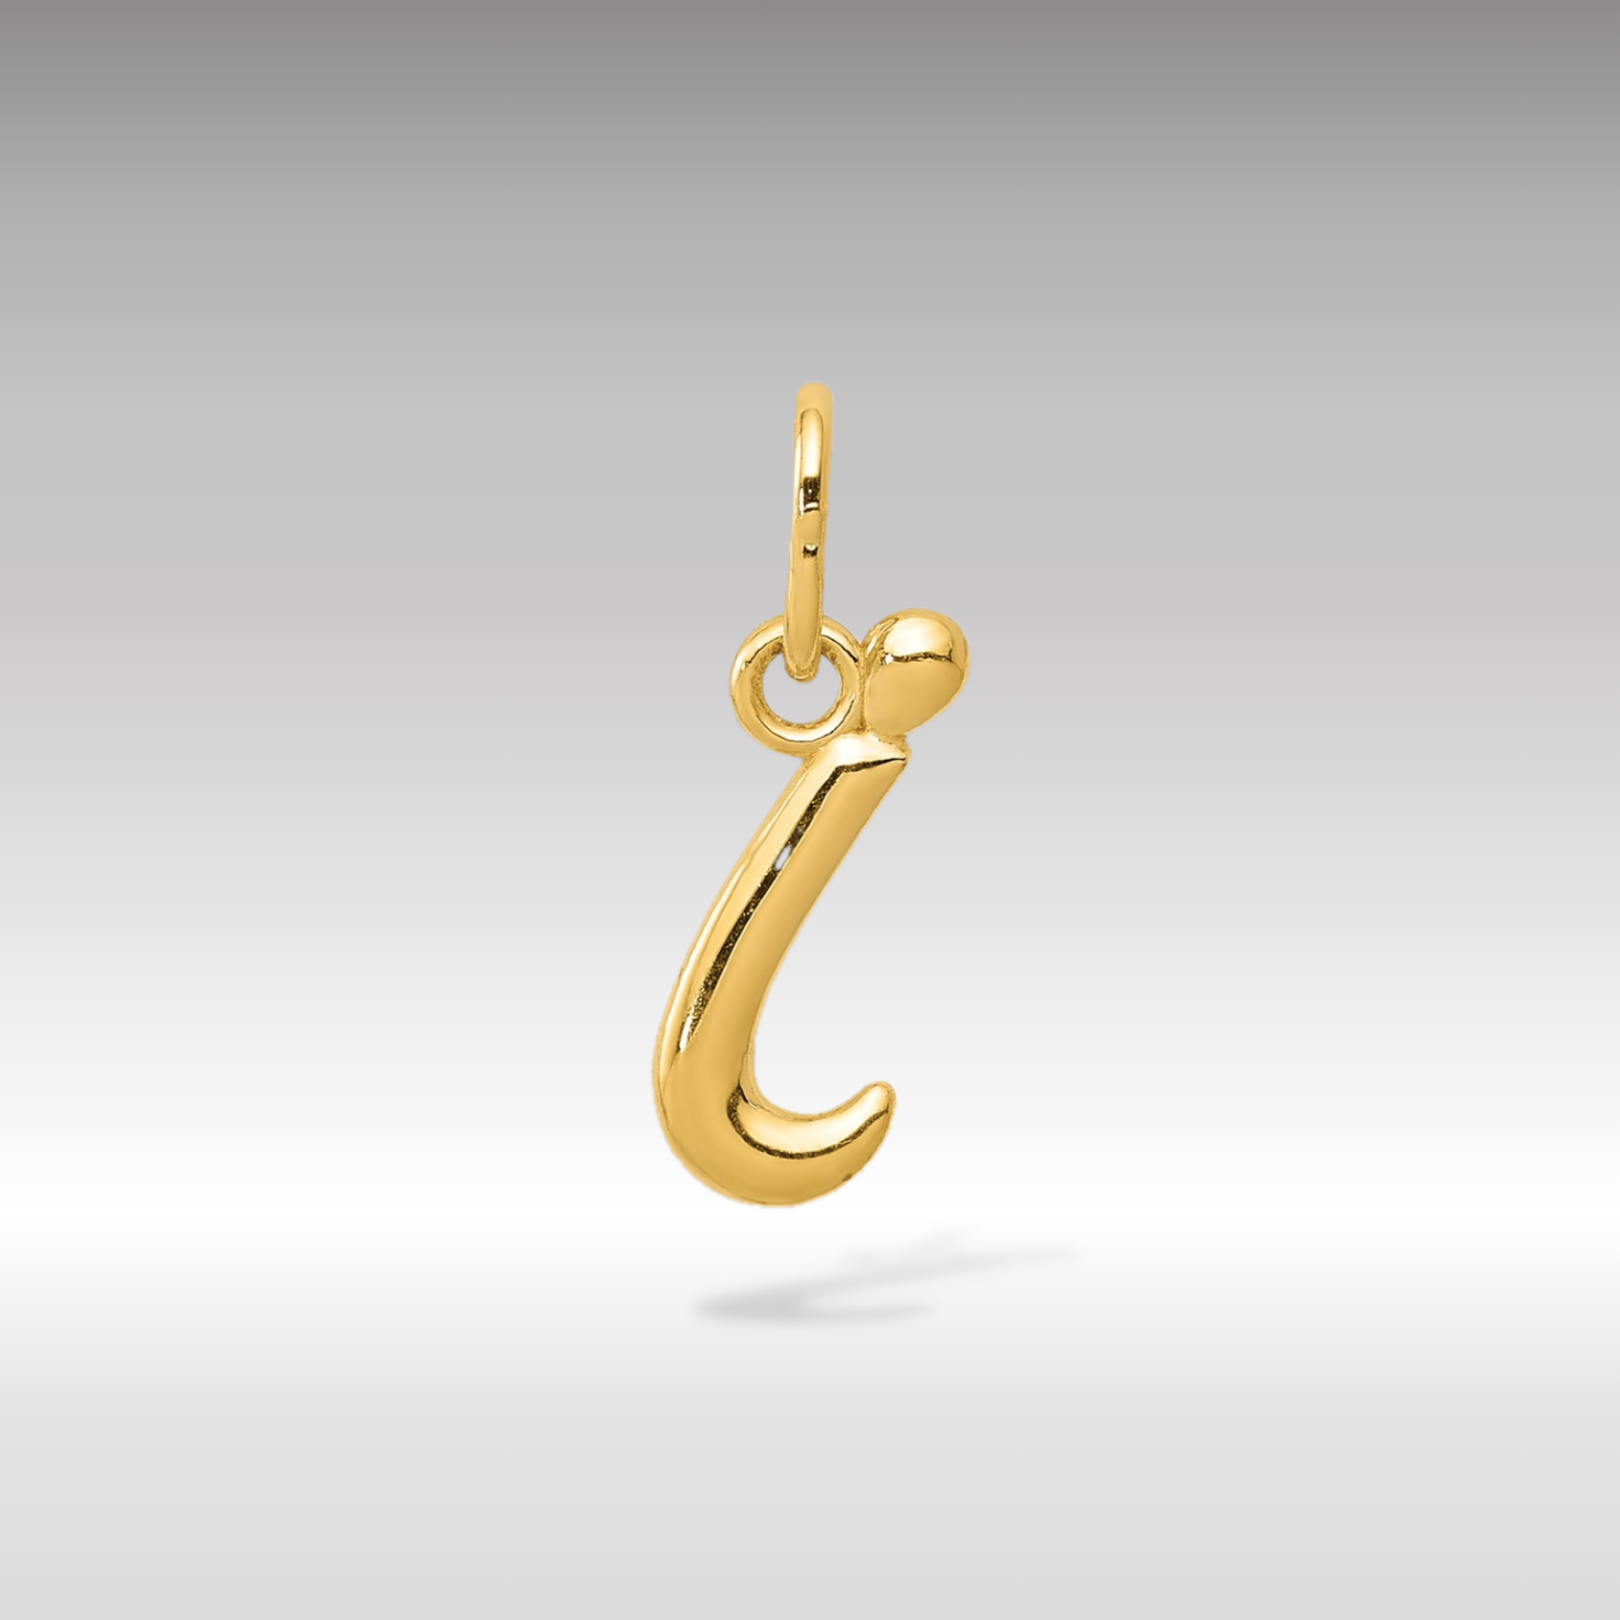 14K Gold Lowercase Initial "i" Pendant - Charlie & Co. Jewelry